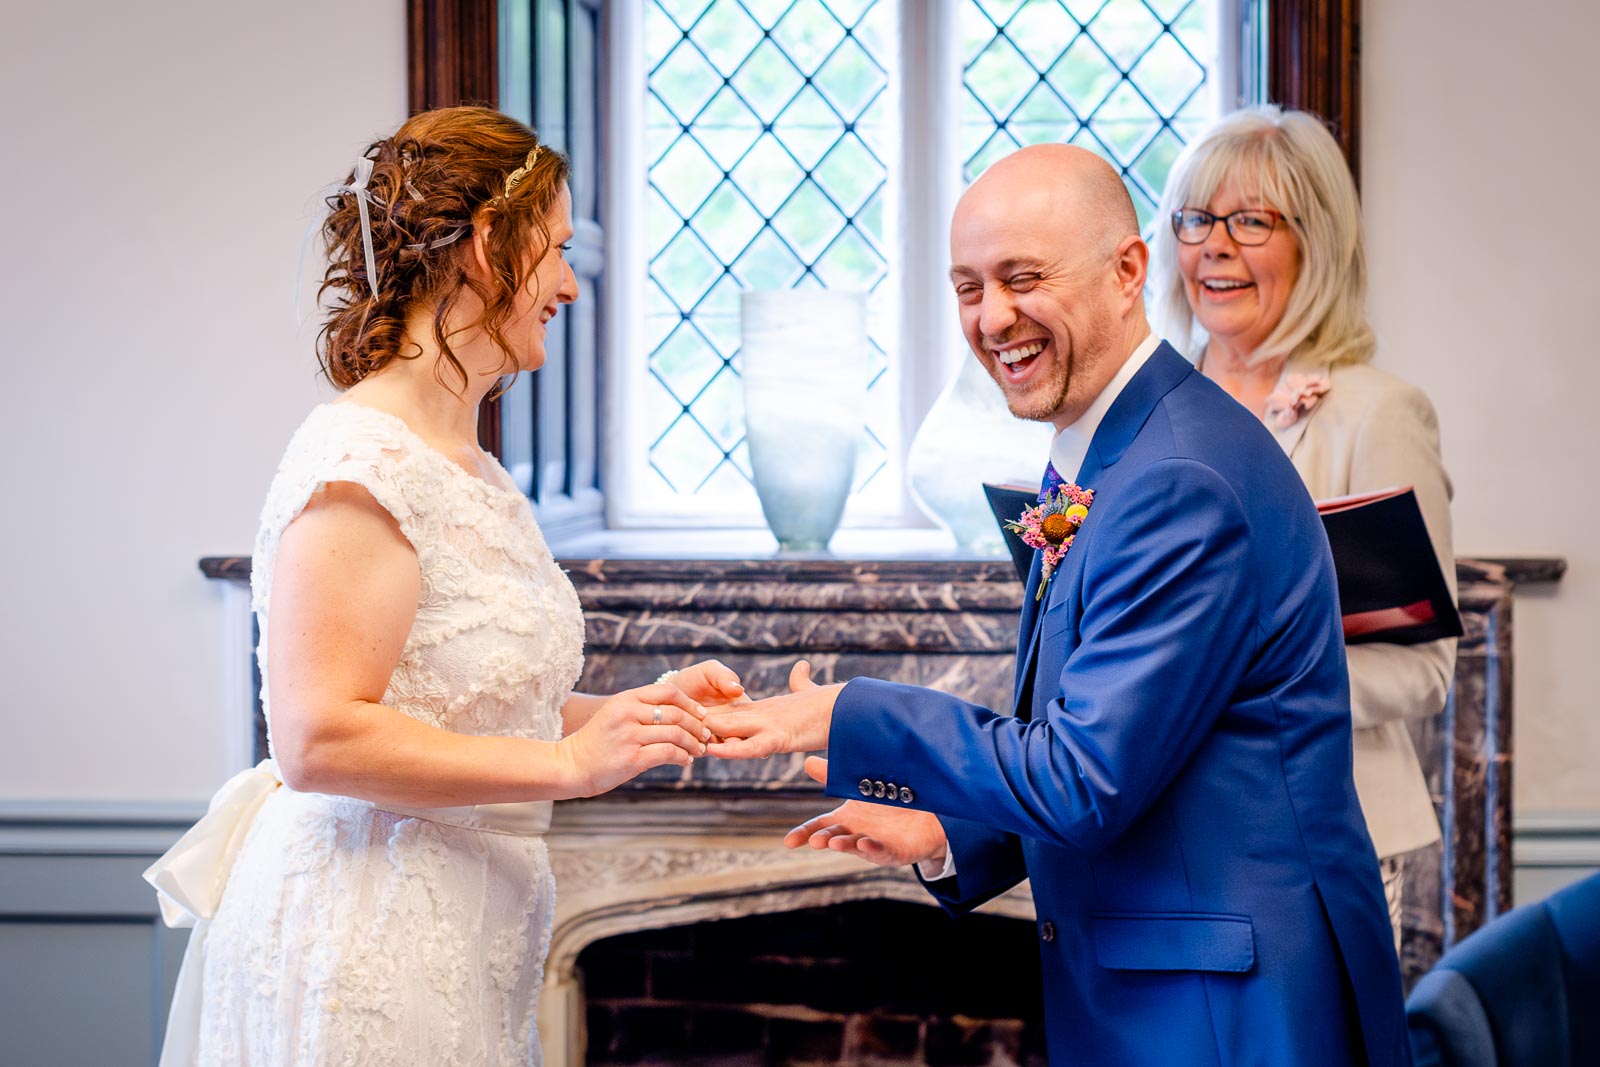 Wedding Photographer for Katherine and Ben at Lewes Registry Office